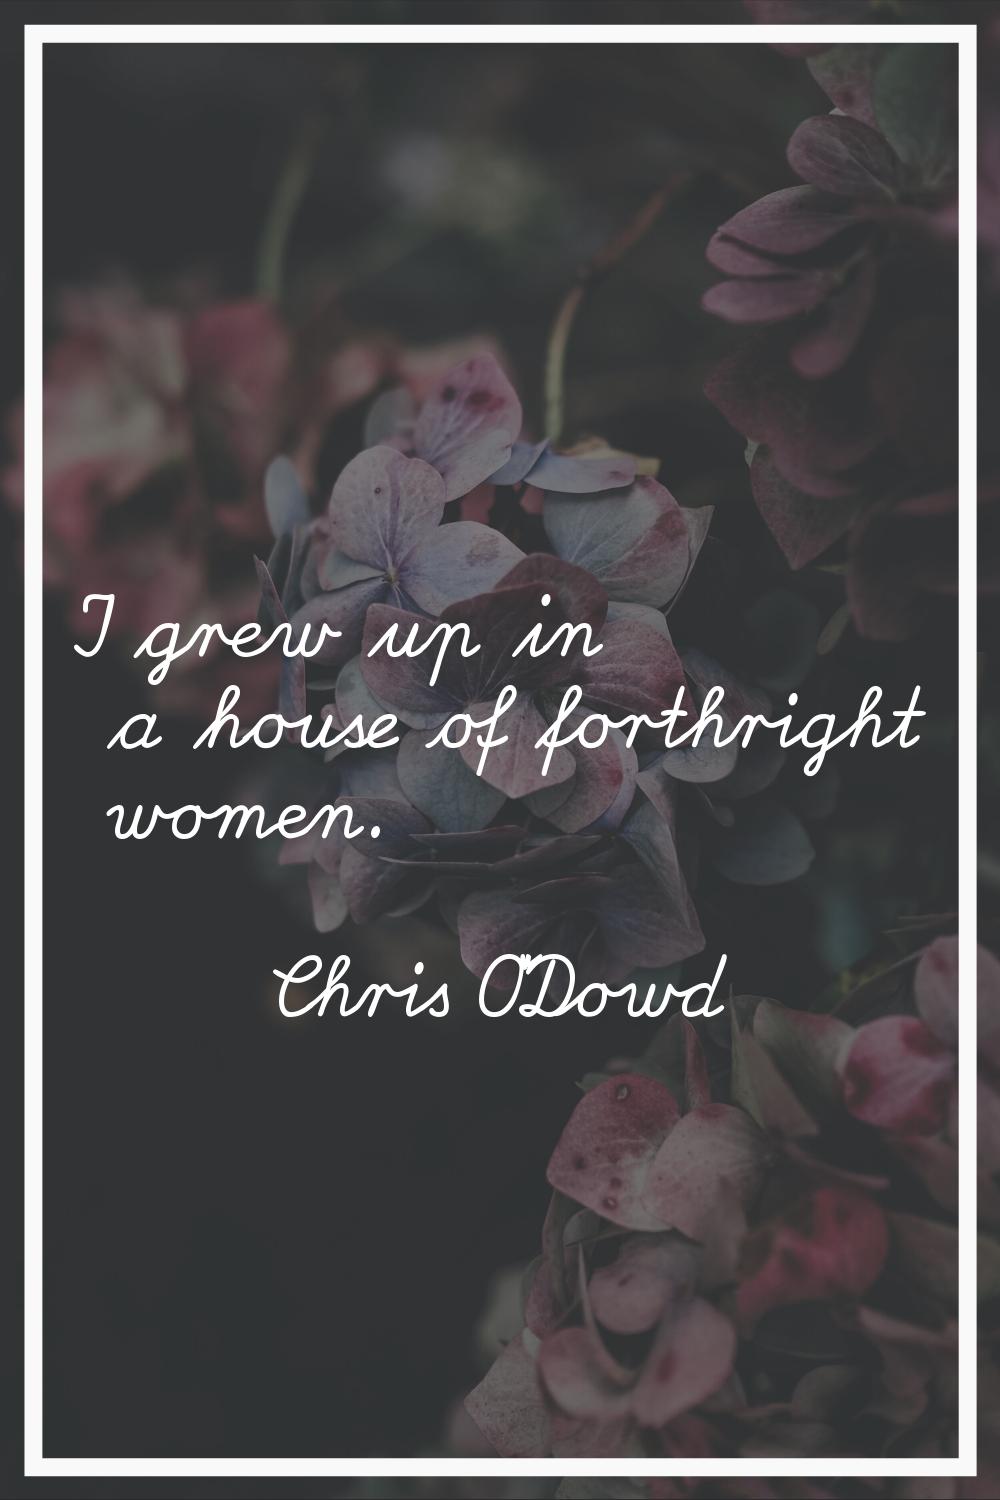 I grew up in a house of forthright women.